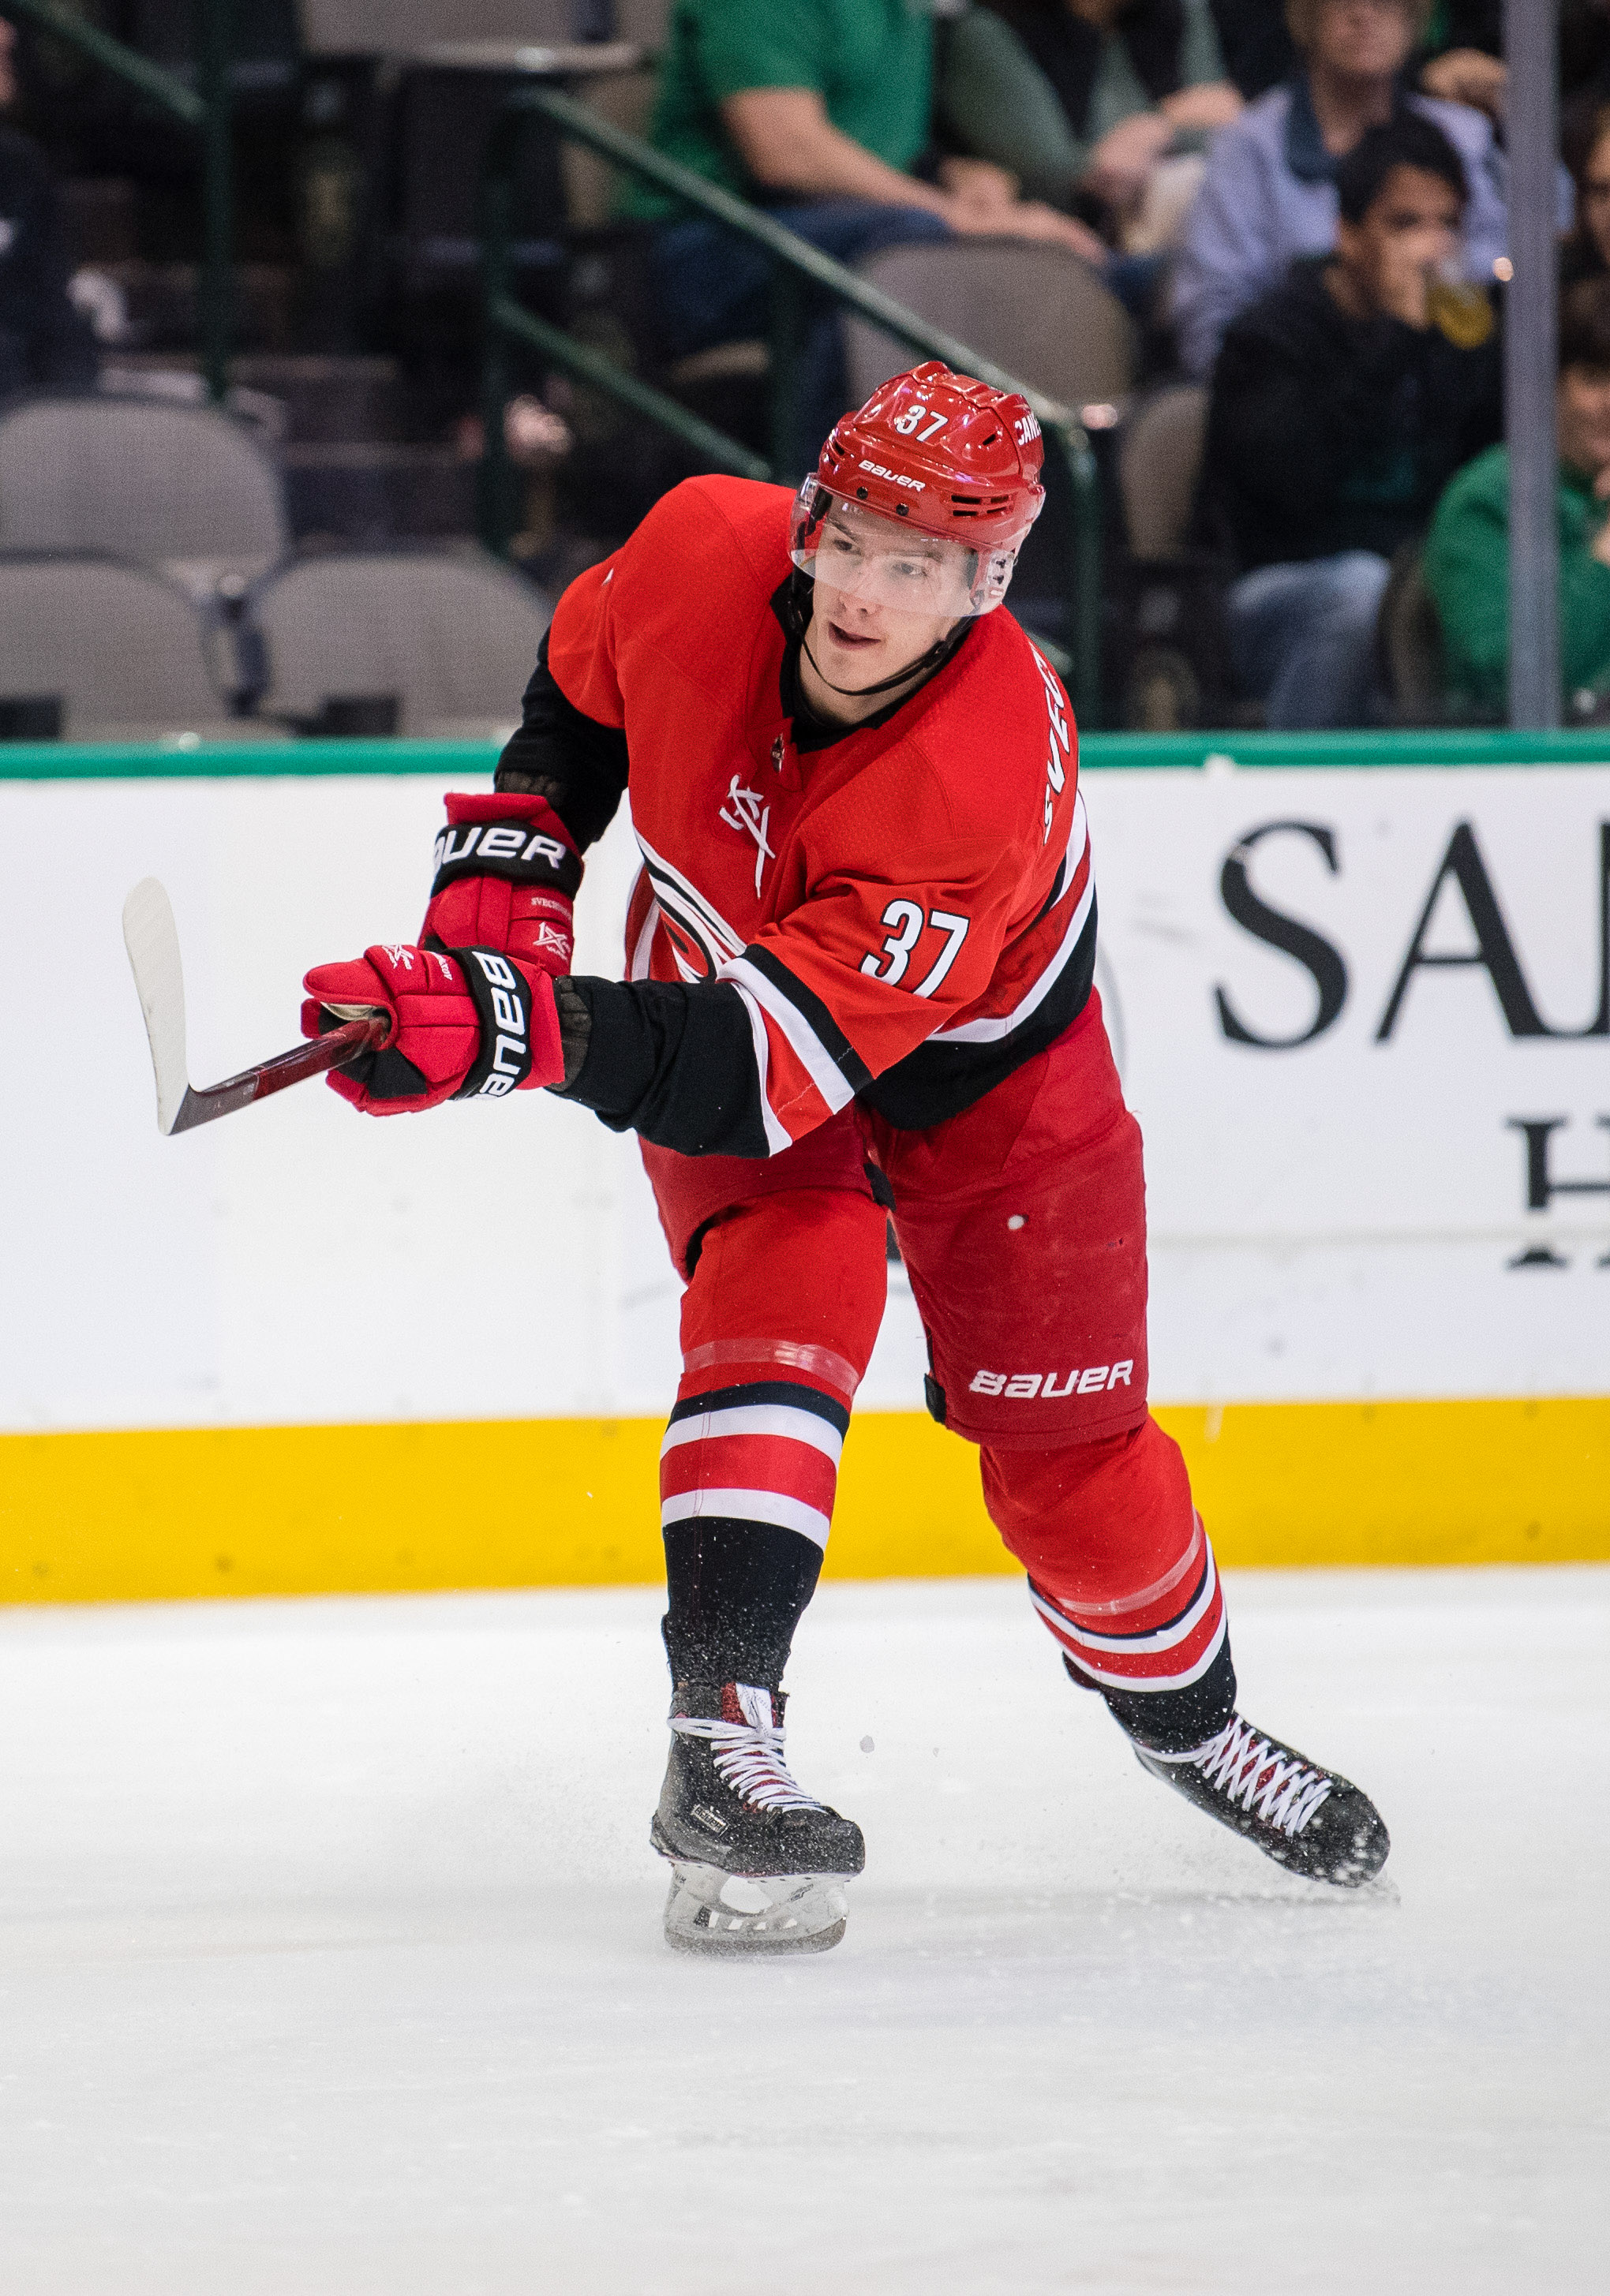 Andrei Svechnikov's ACL Tear and Road to Recovery